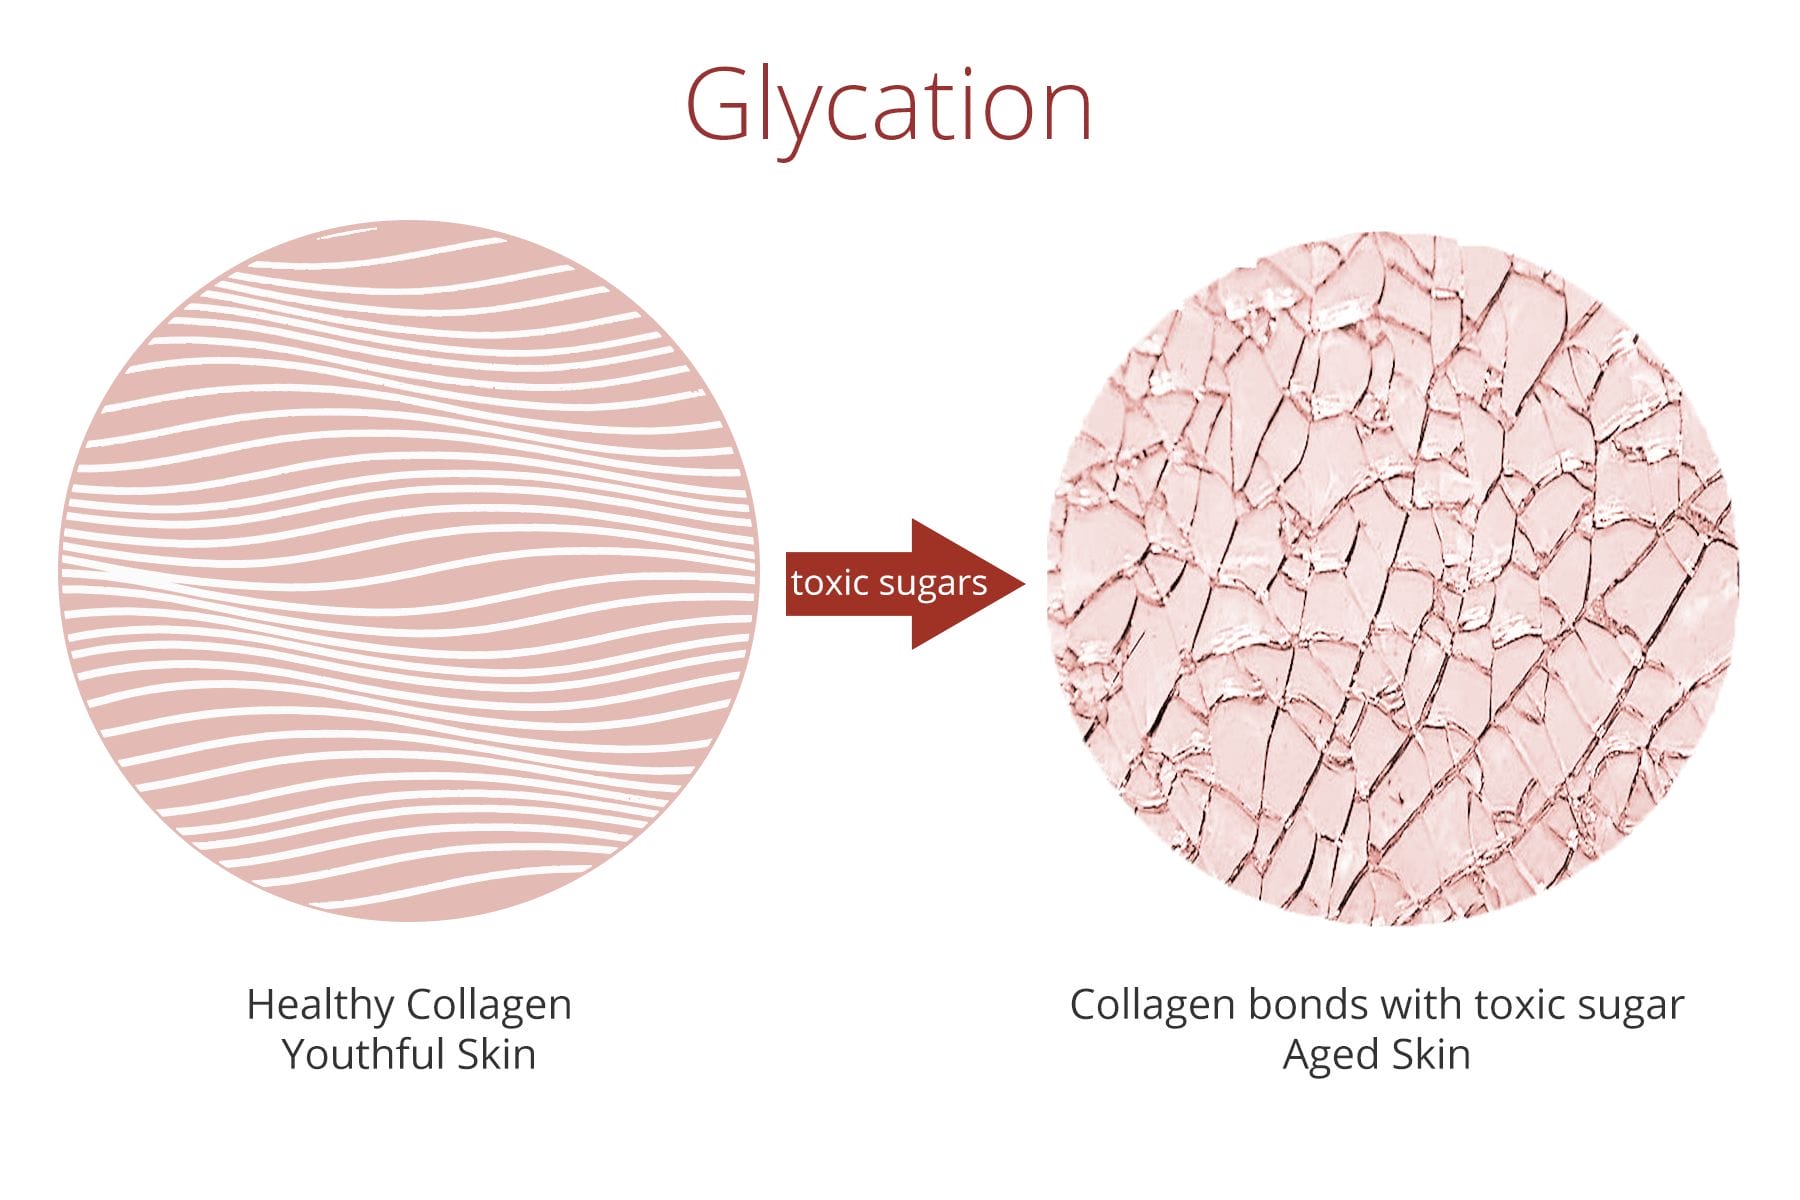 Glycation damages cells and speeds up aging.